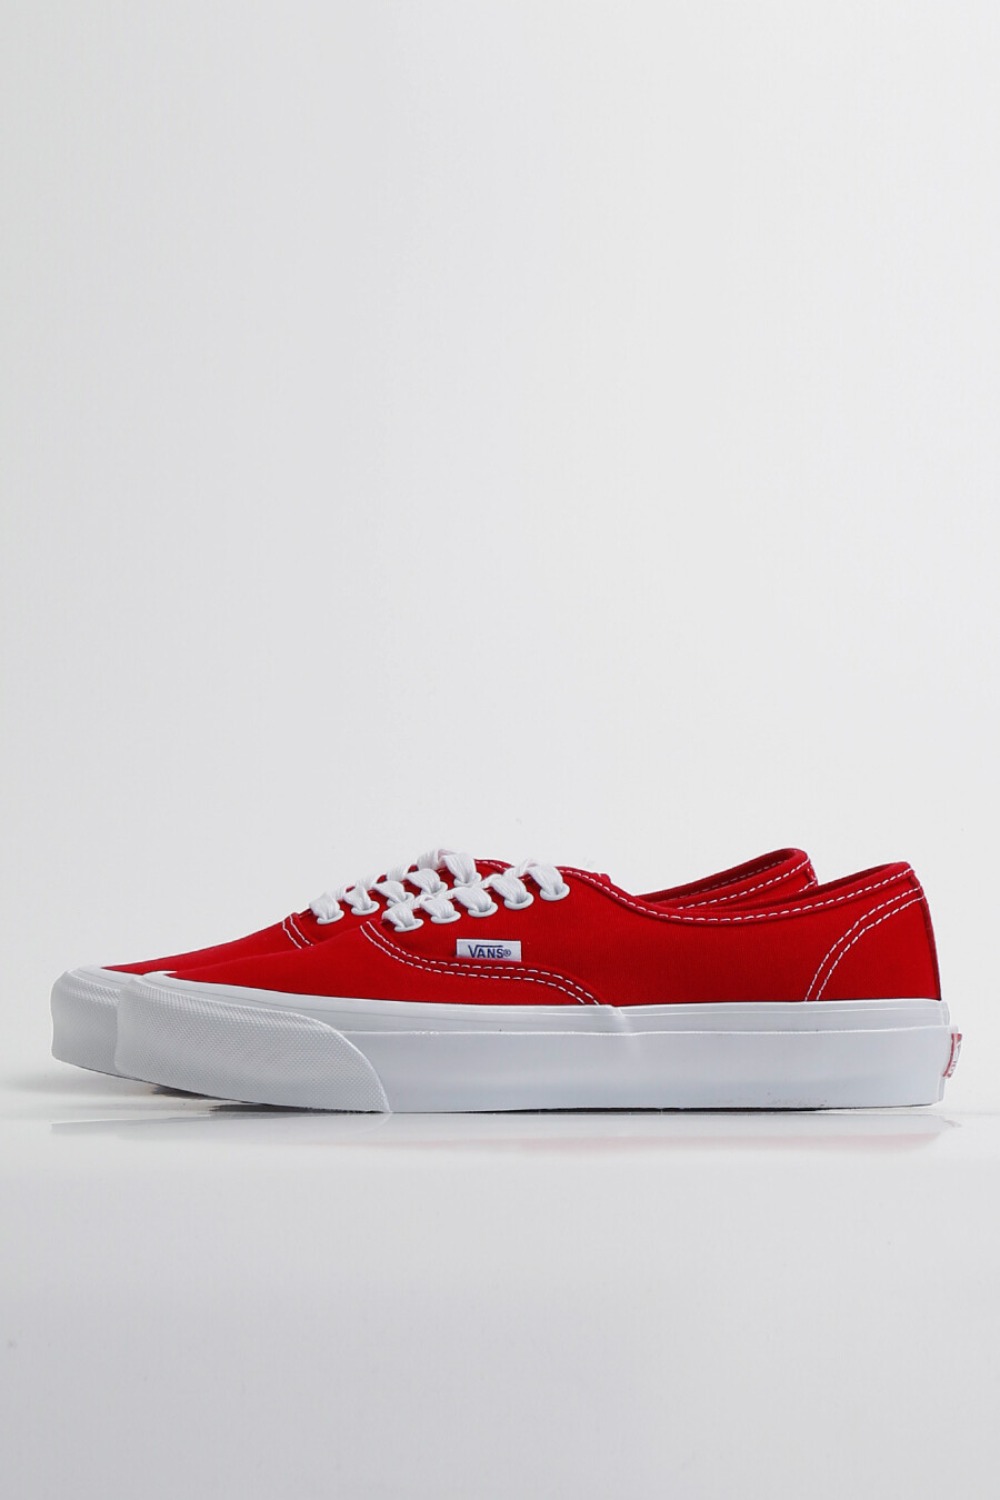 OG AUTHENTIC LX(CANVAS)RED/TRUE WHITE